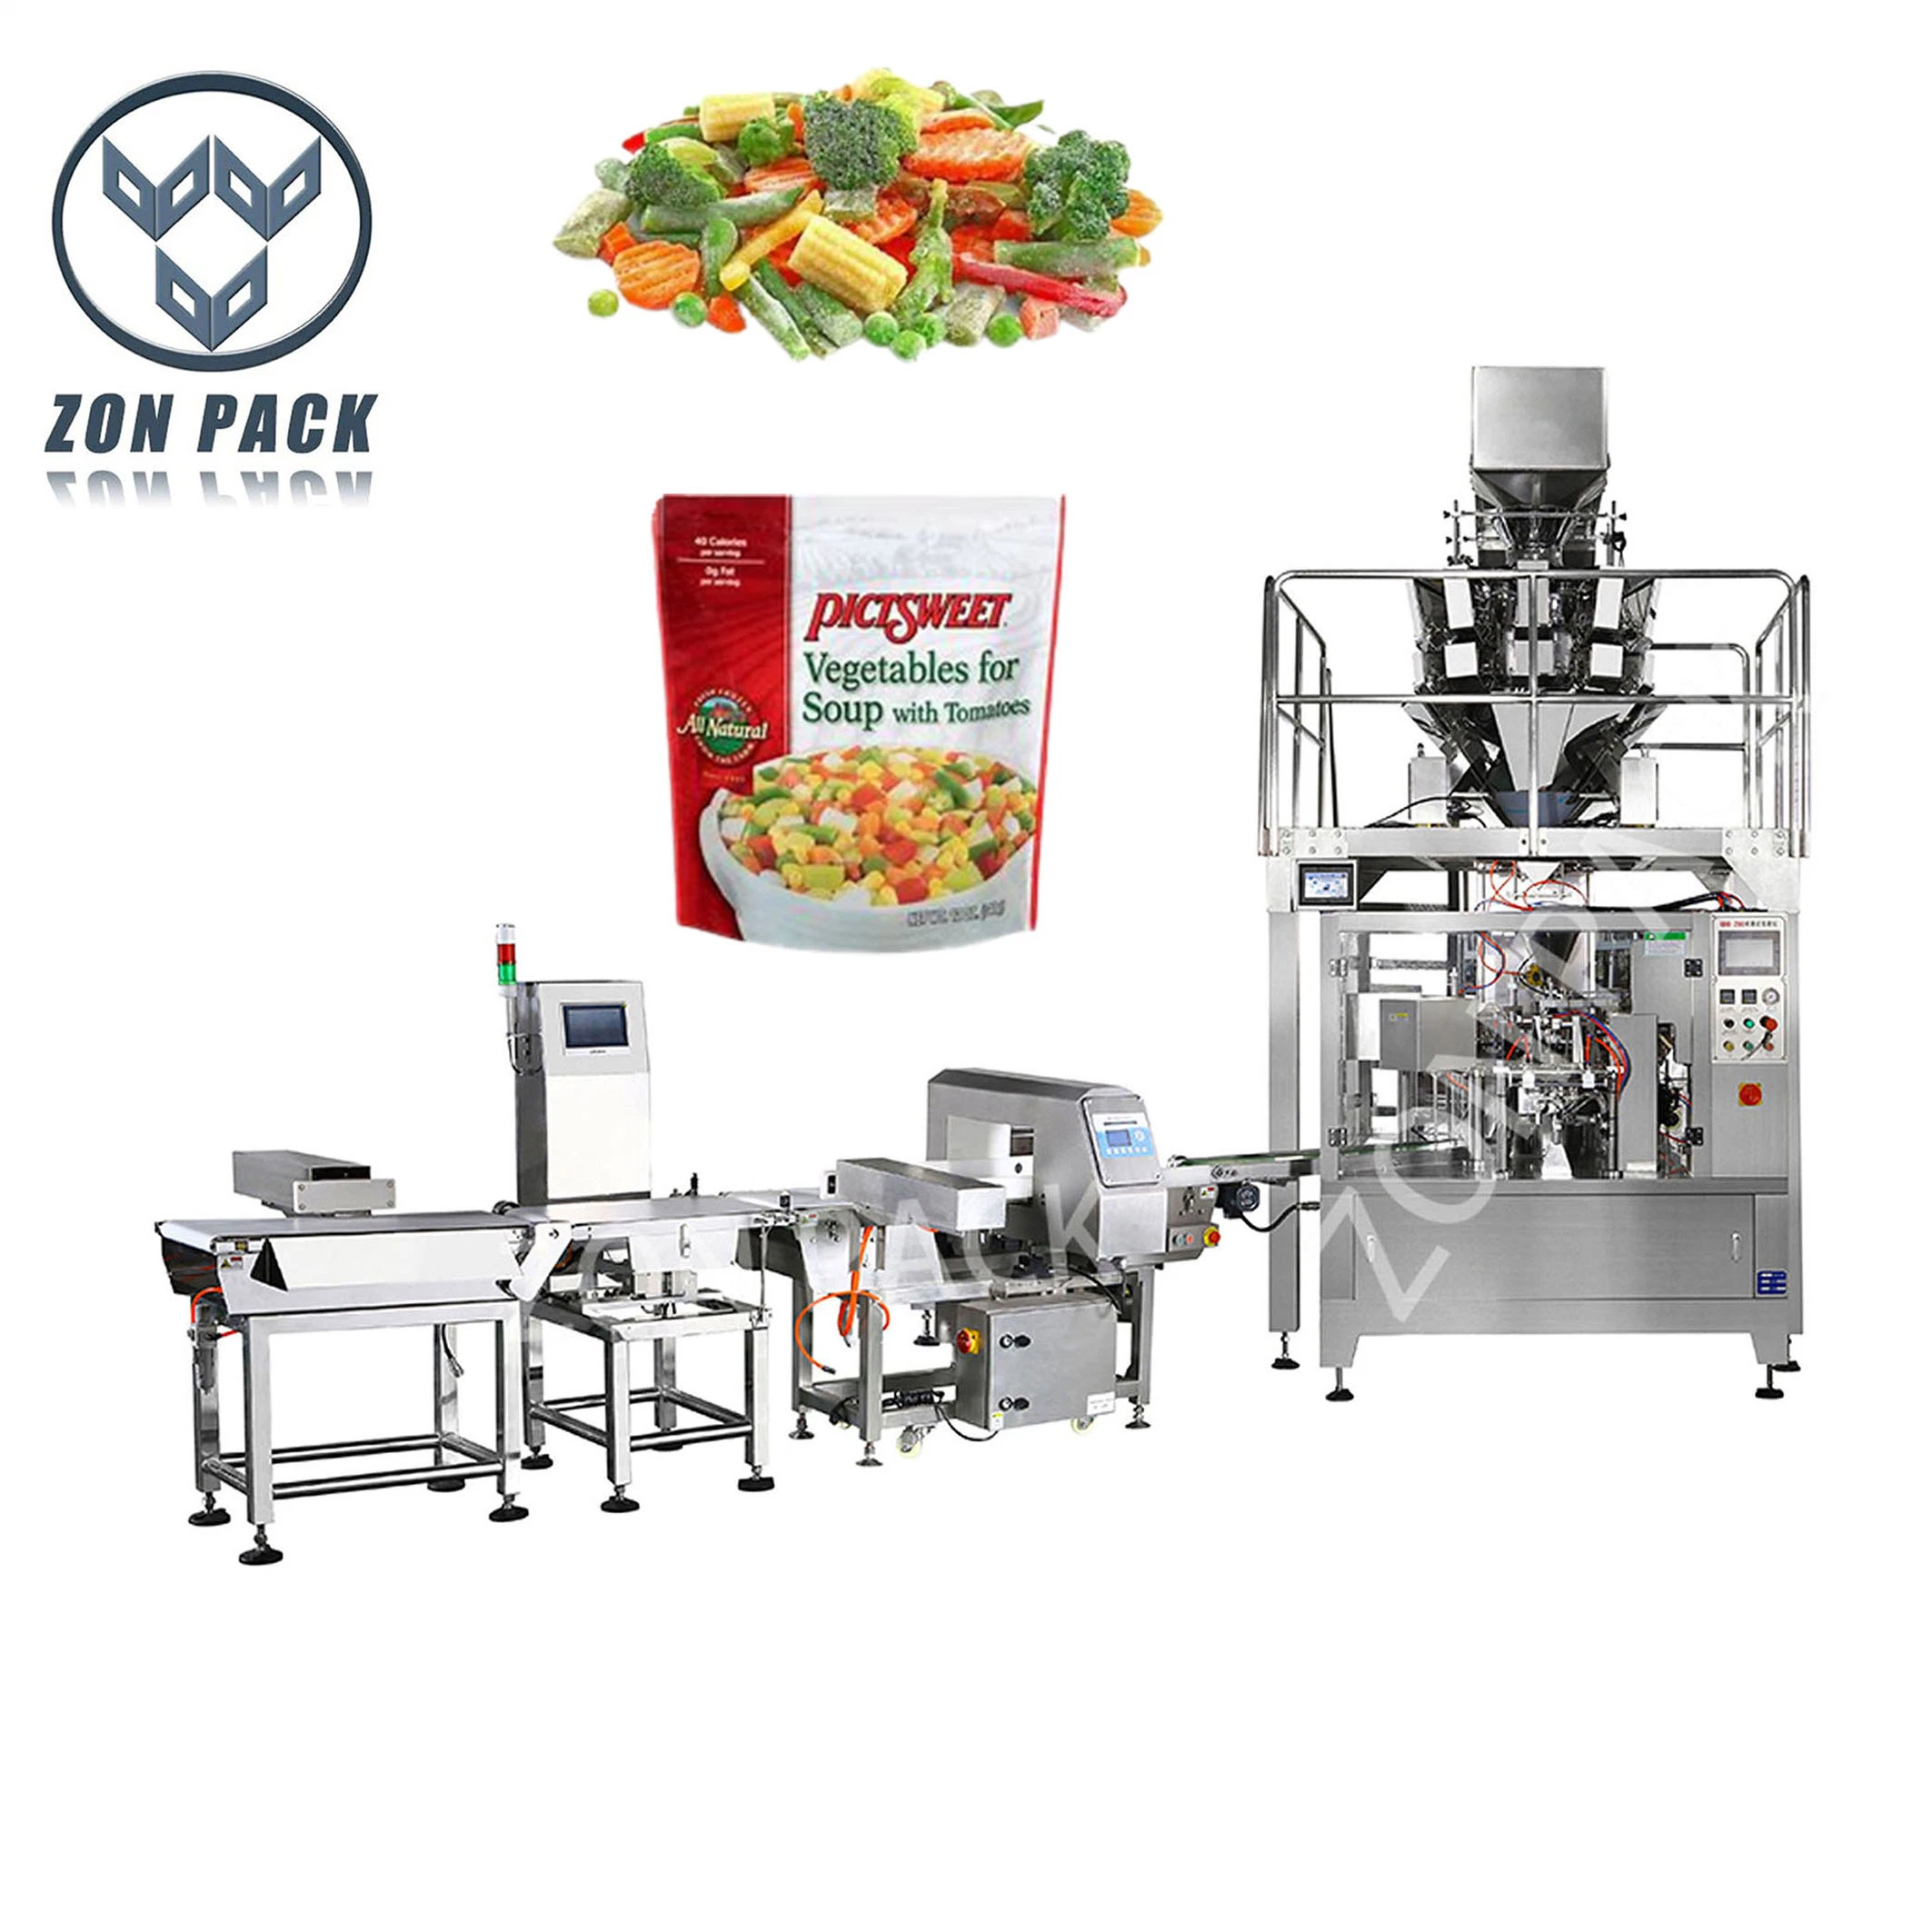 500g 1kg Frozen Vegetables Frozen Food Weighing Premade Bag Packing Automatic Packing Machine